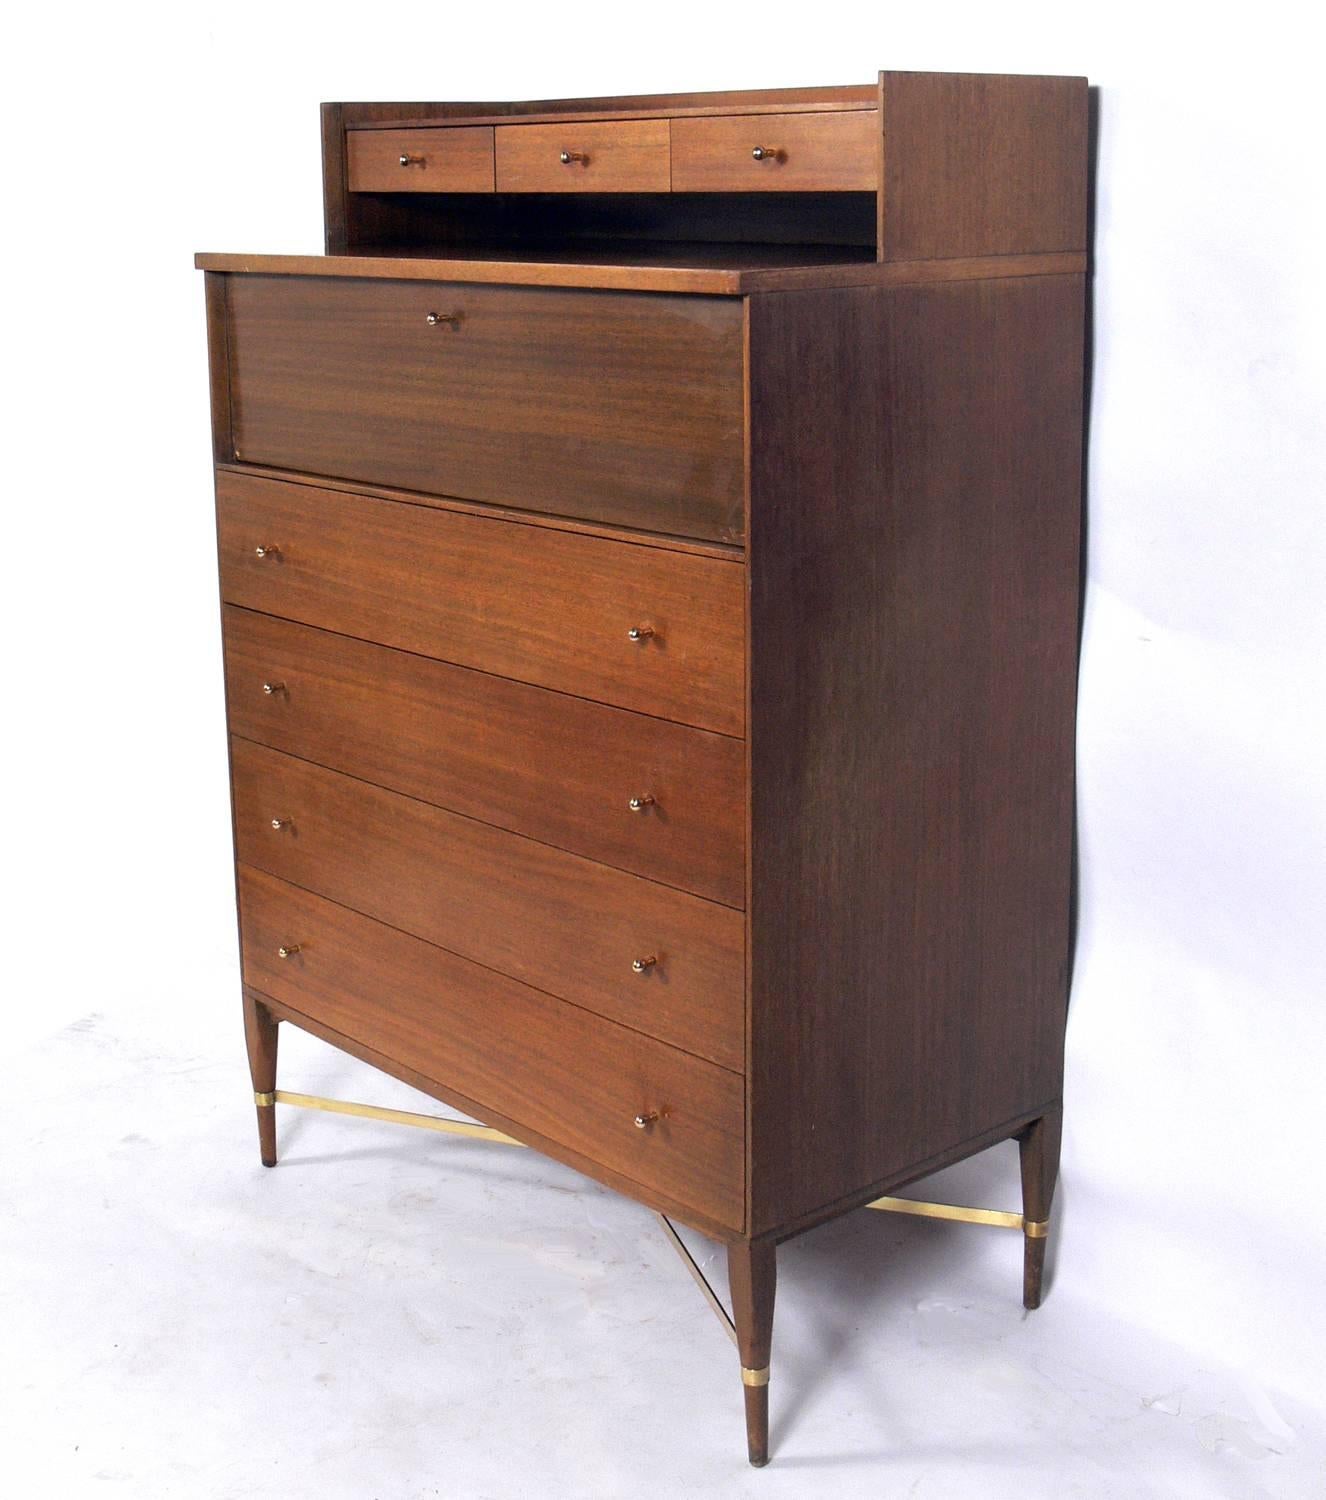 Tall chest of drawers, designed by Paul McCobb for Calvin, American, circa 1950s. Rare to find the integrated jewelry box at the top. This piece is currently being refinished and can be completed in your choice of color. The price noted below